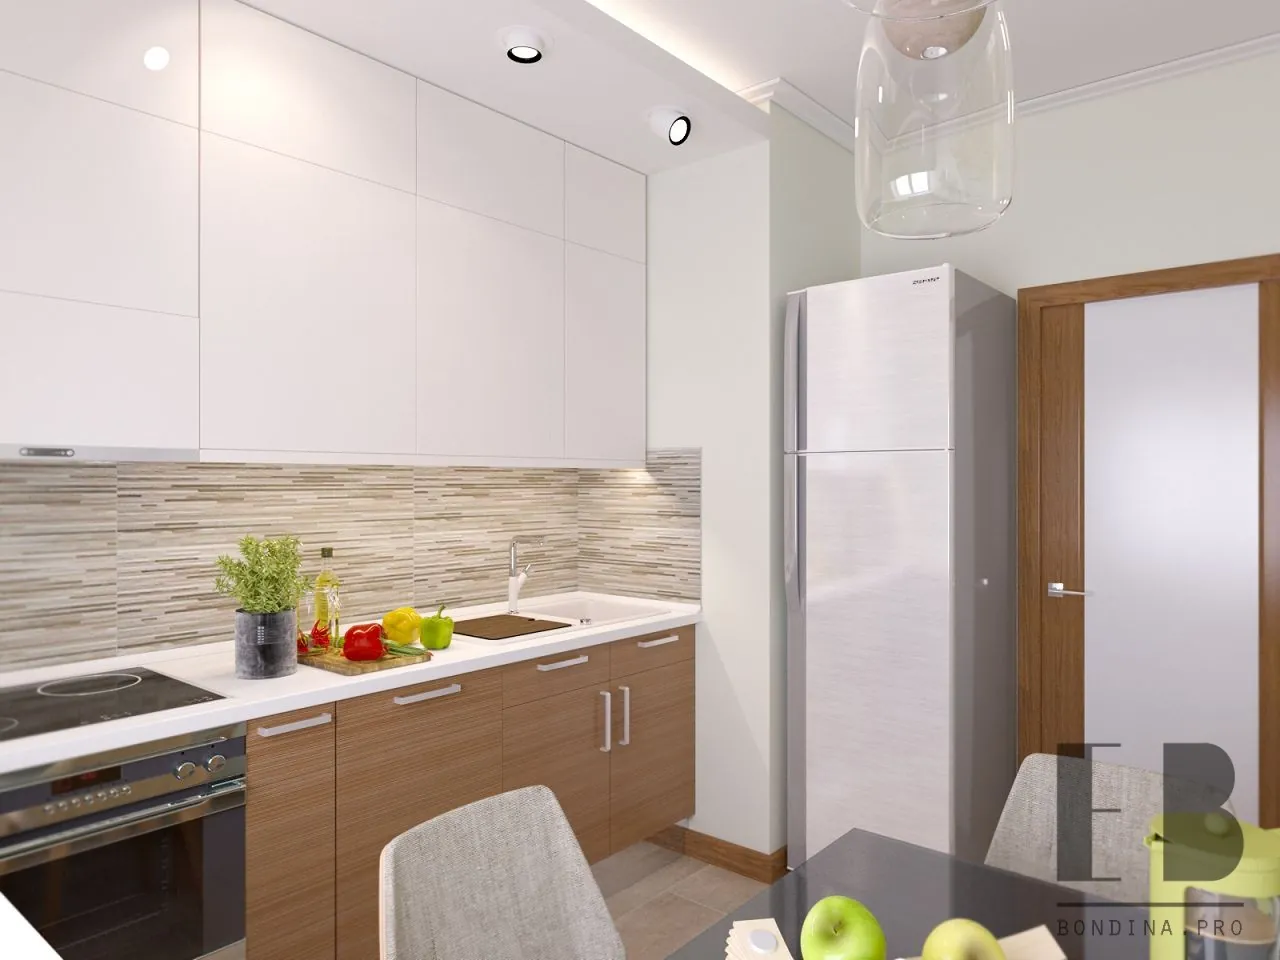 Modern kitchen with two-tone cabinets (white and wood), white countertop and beige glass mosaic tile backsplash